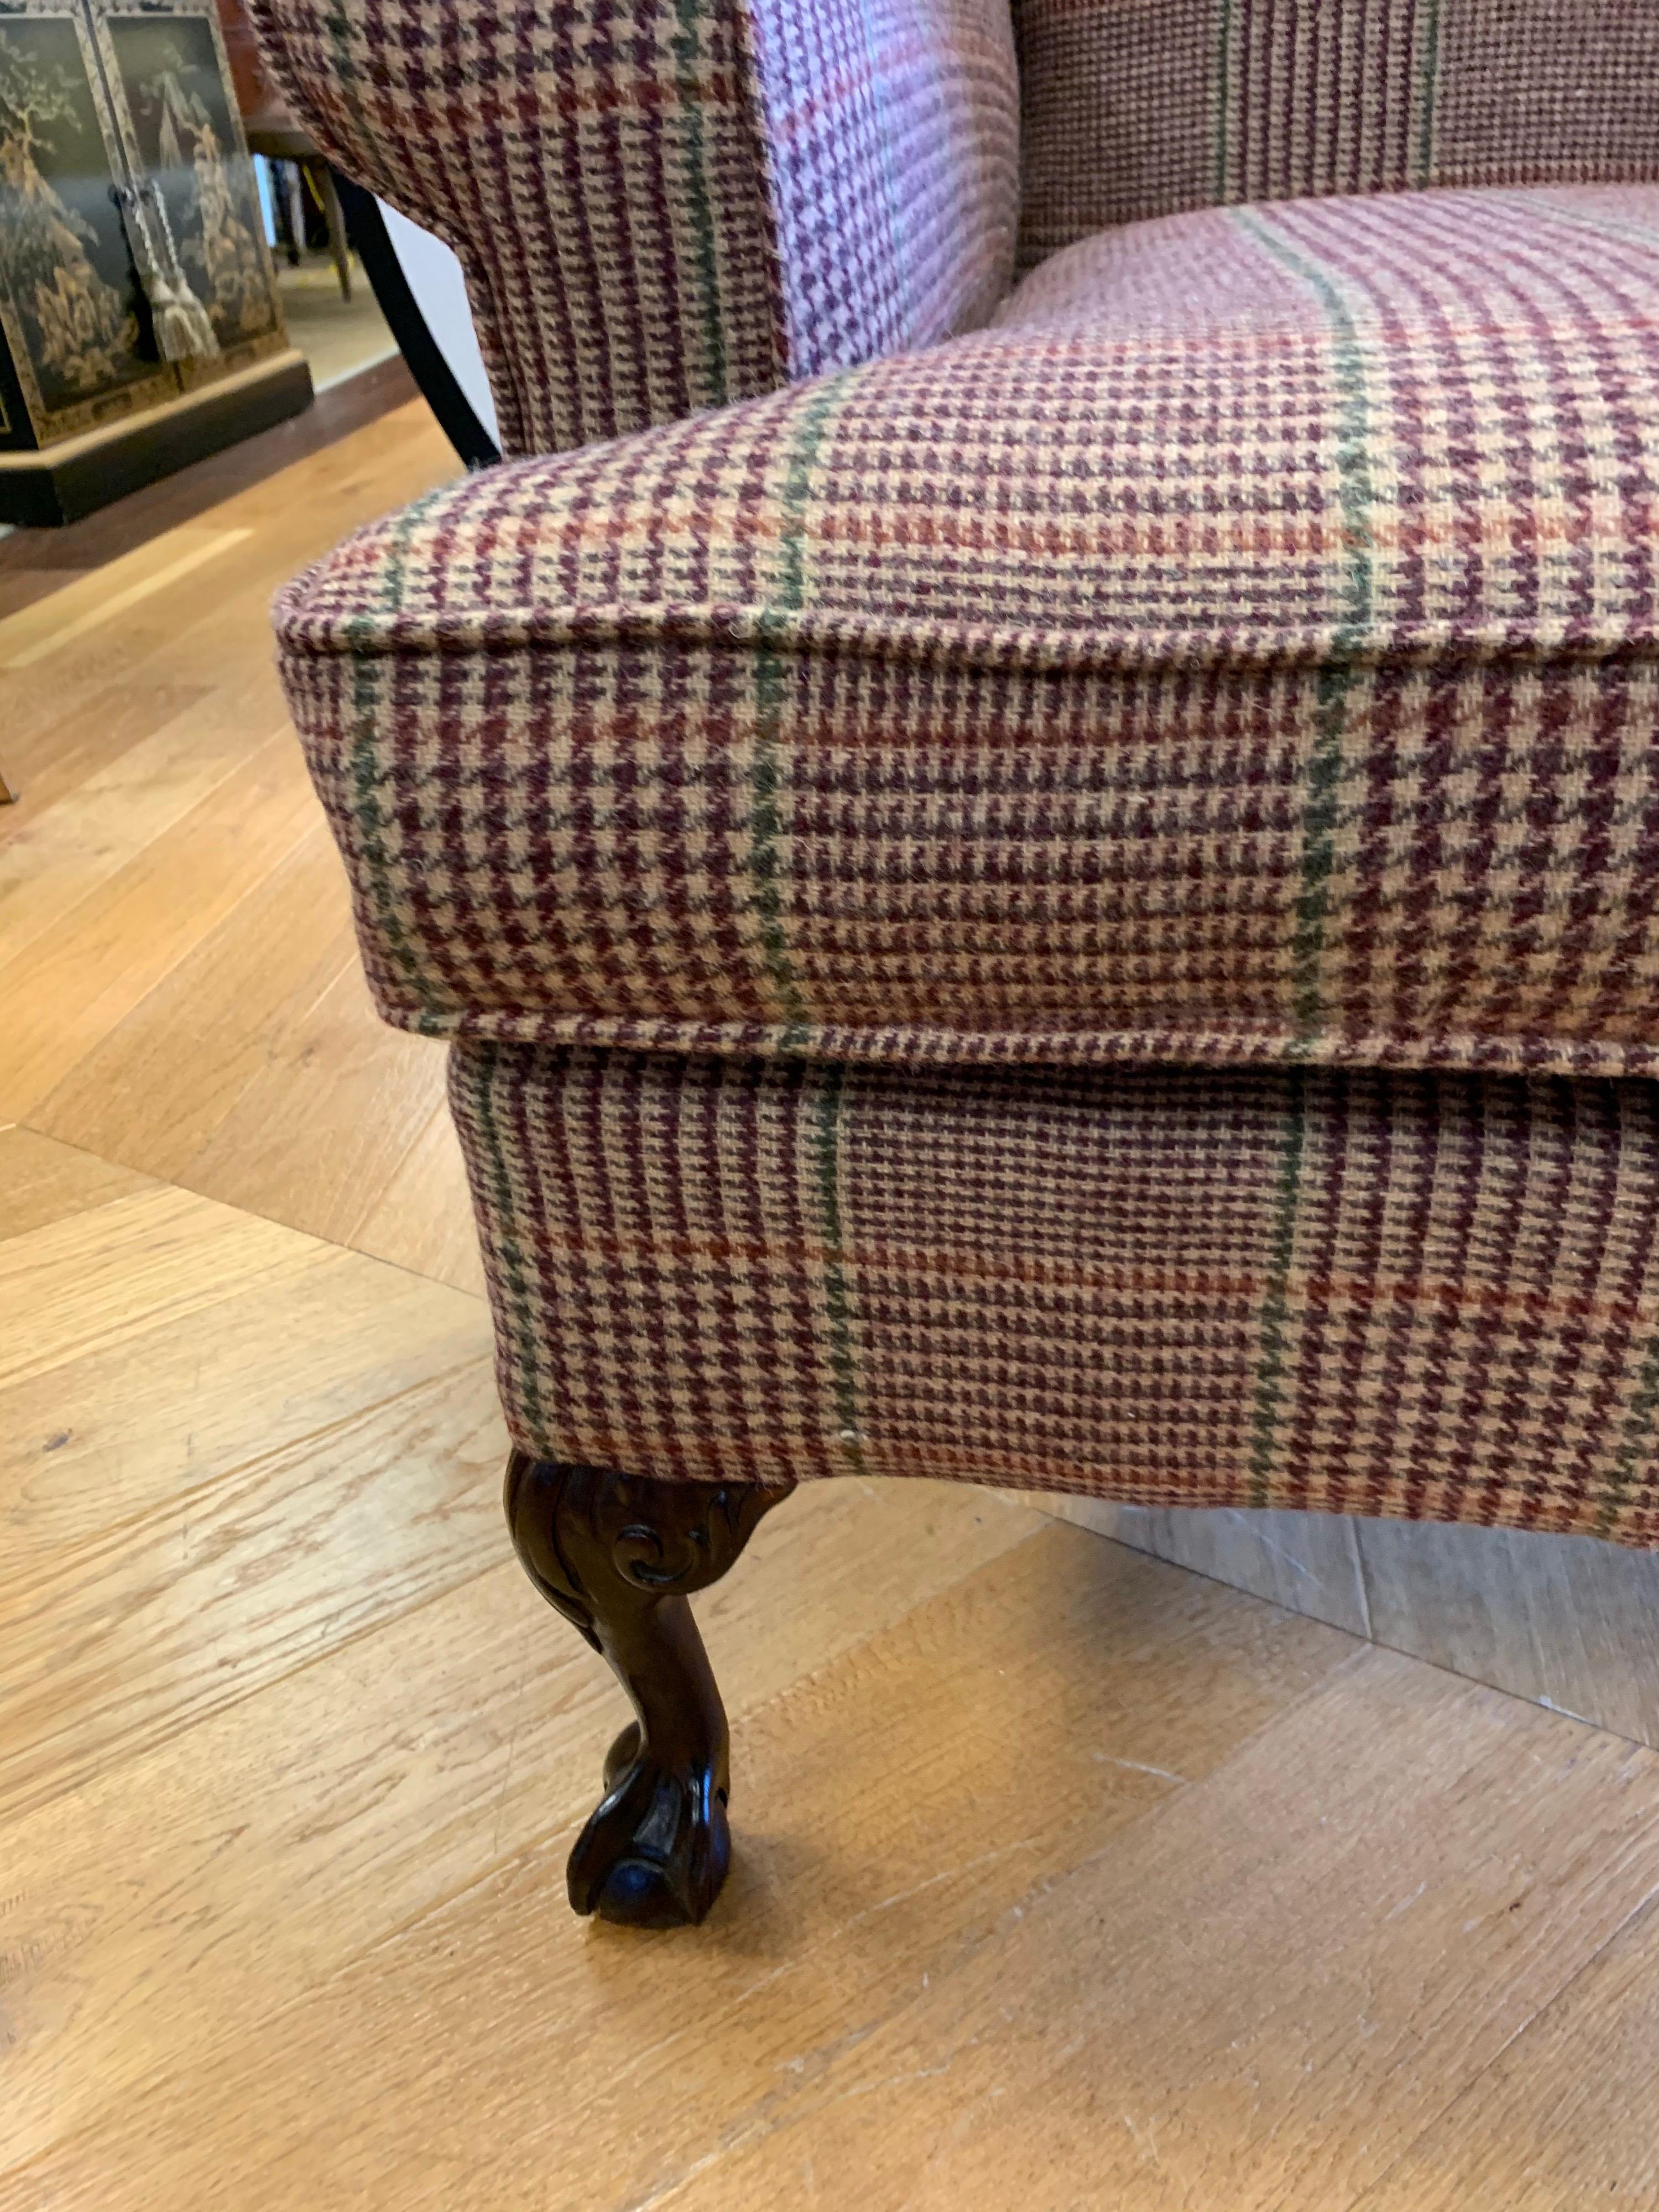 Magnificent Georgian antique wingback chair that has been newly reupholstered in the Ralph Lauren
tartan wool plaid fabric. The tartan plaid fabric melds perfectly with the dark, rich mahogany ball and claw legs. One of three special chairs we are